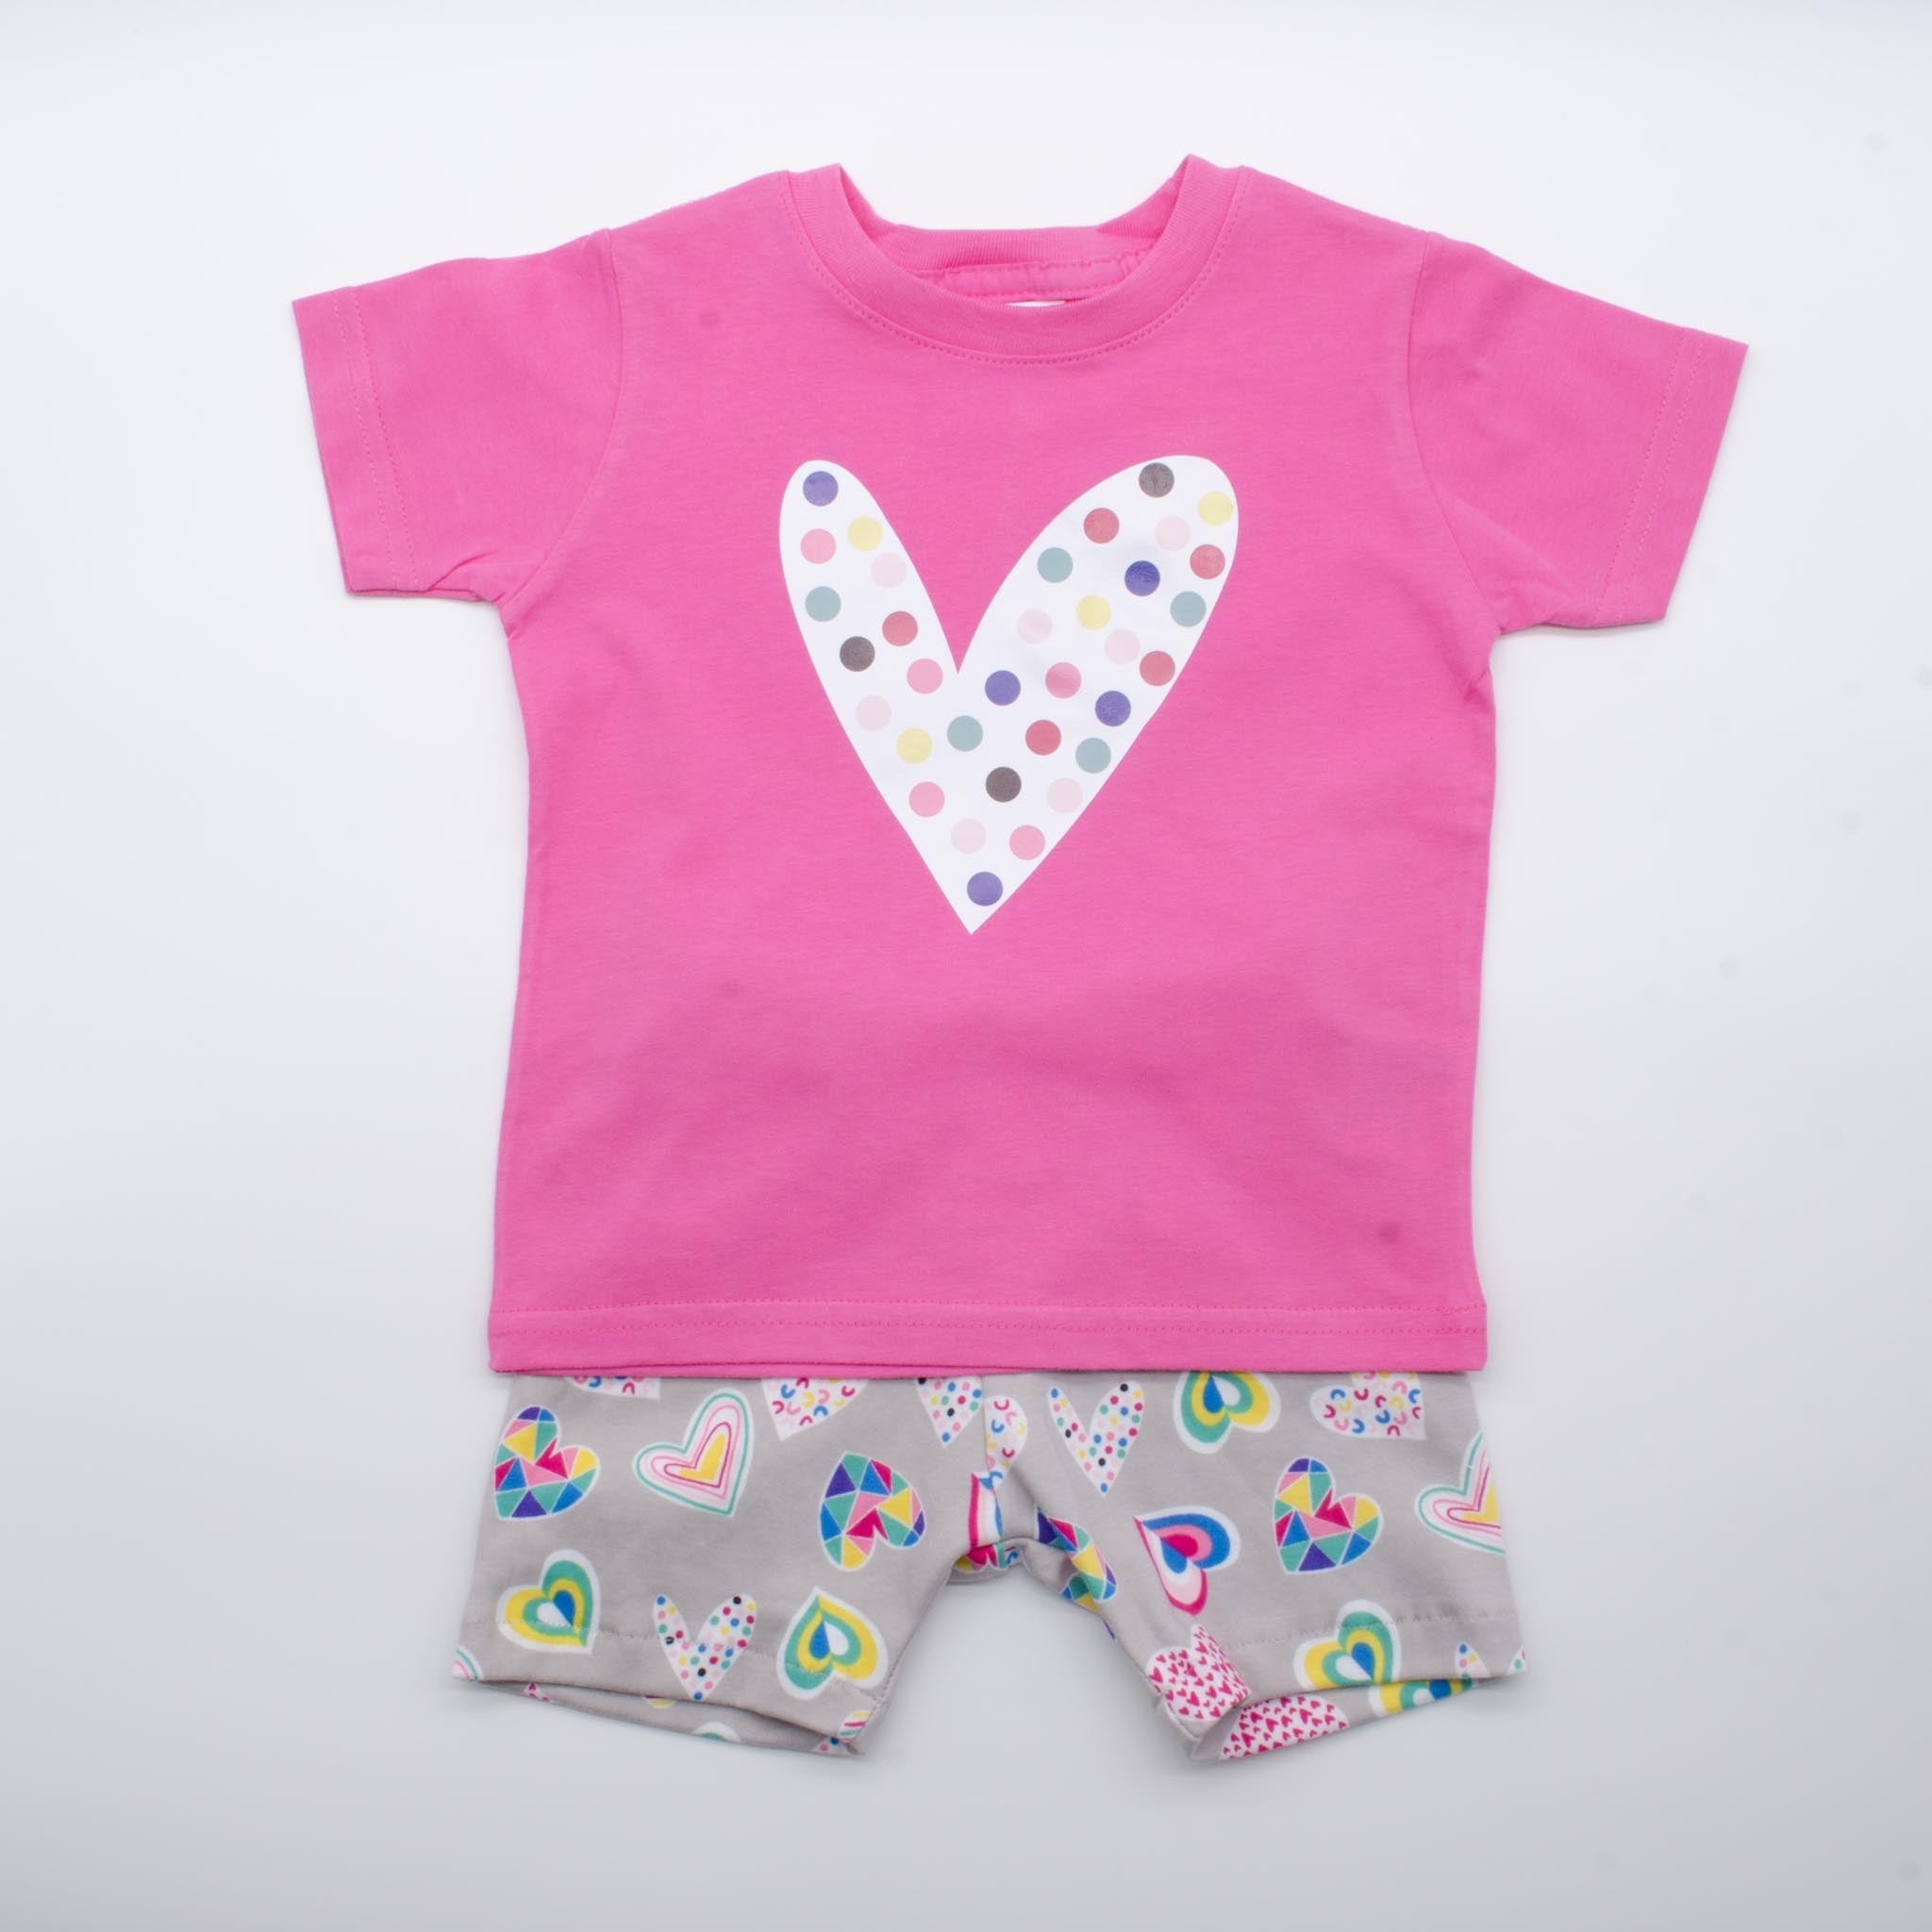 Love Spots Outfit for Baby